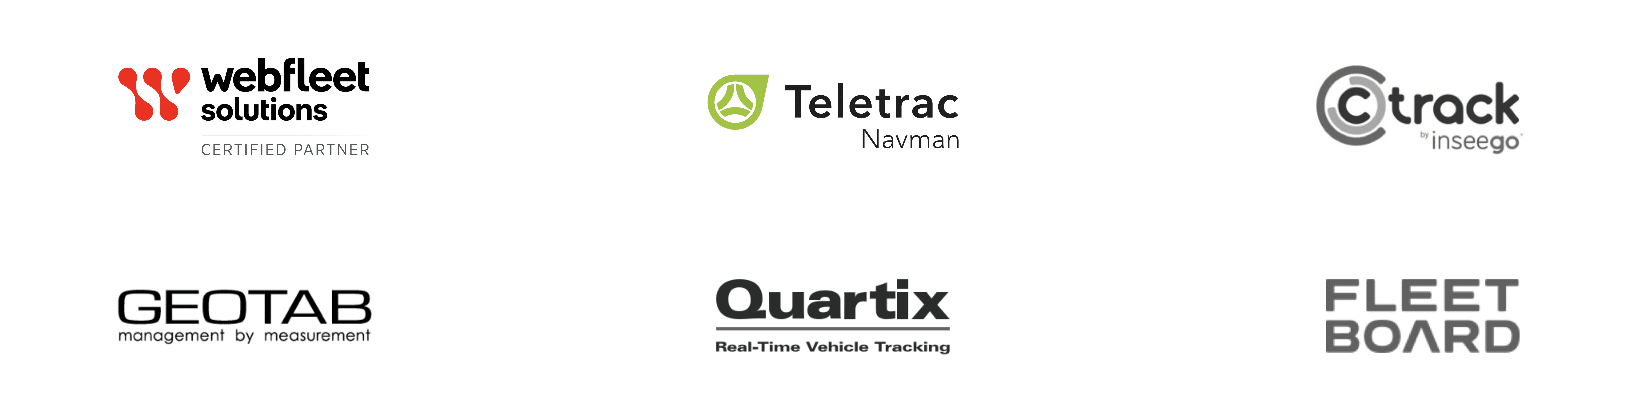 Image highlighting some of MaxOptra's partners, including Teletrac Navman, Geotab, and Ctrack